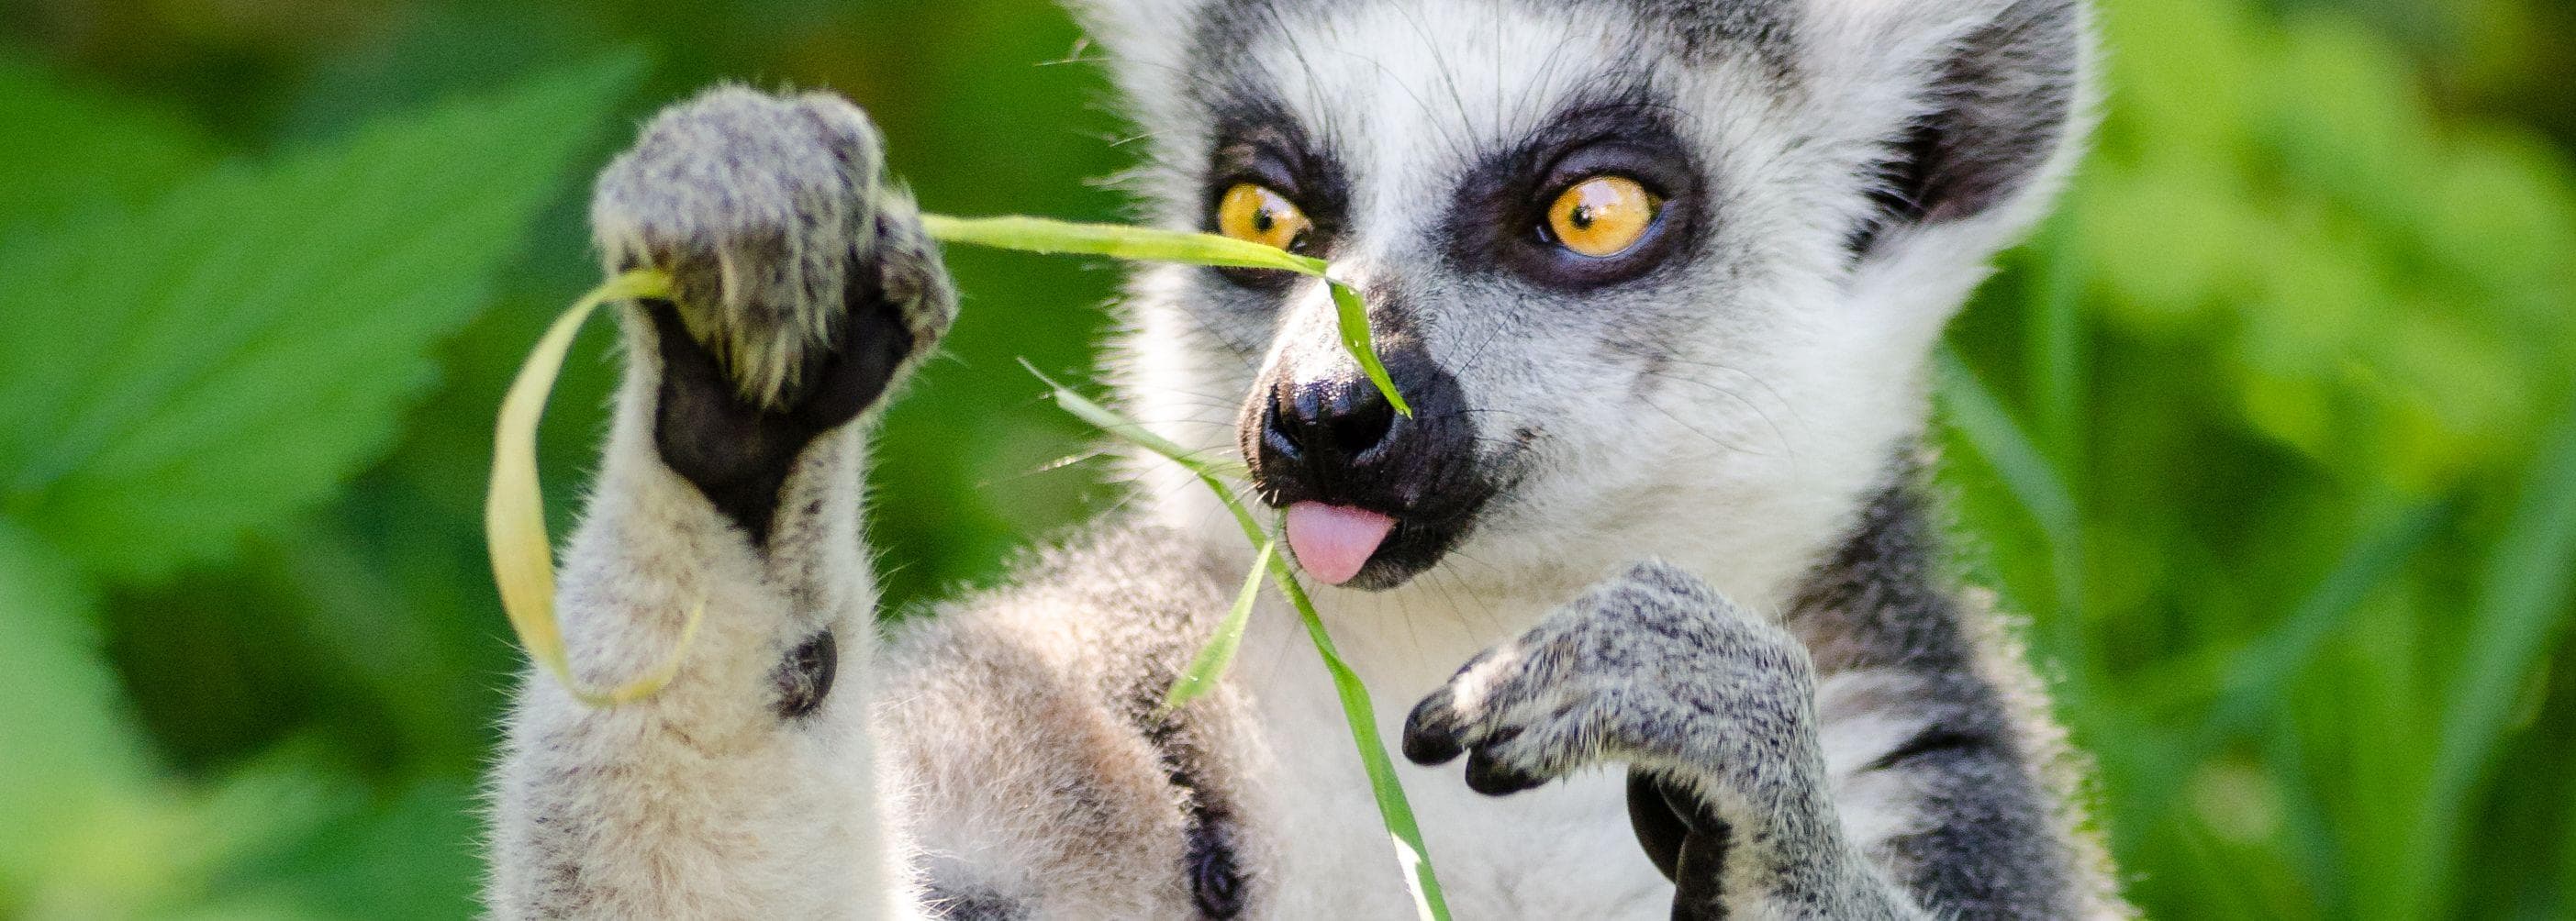 13 Insanely Cool Animals You Can Only Find In Madagascar